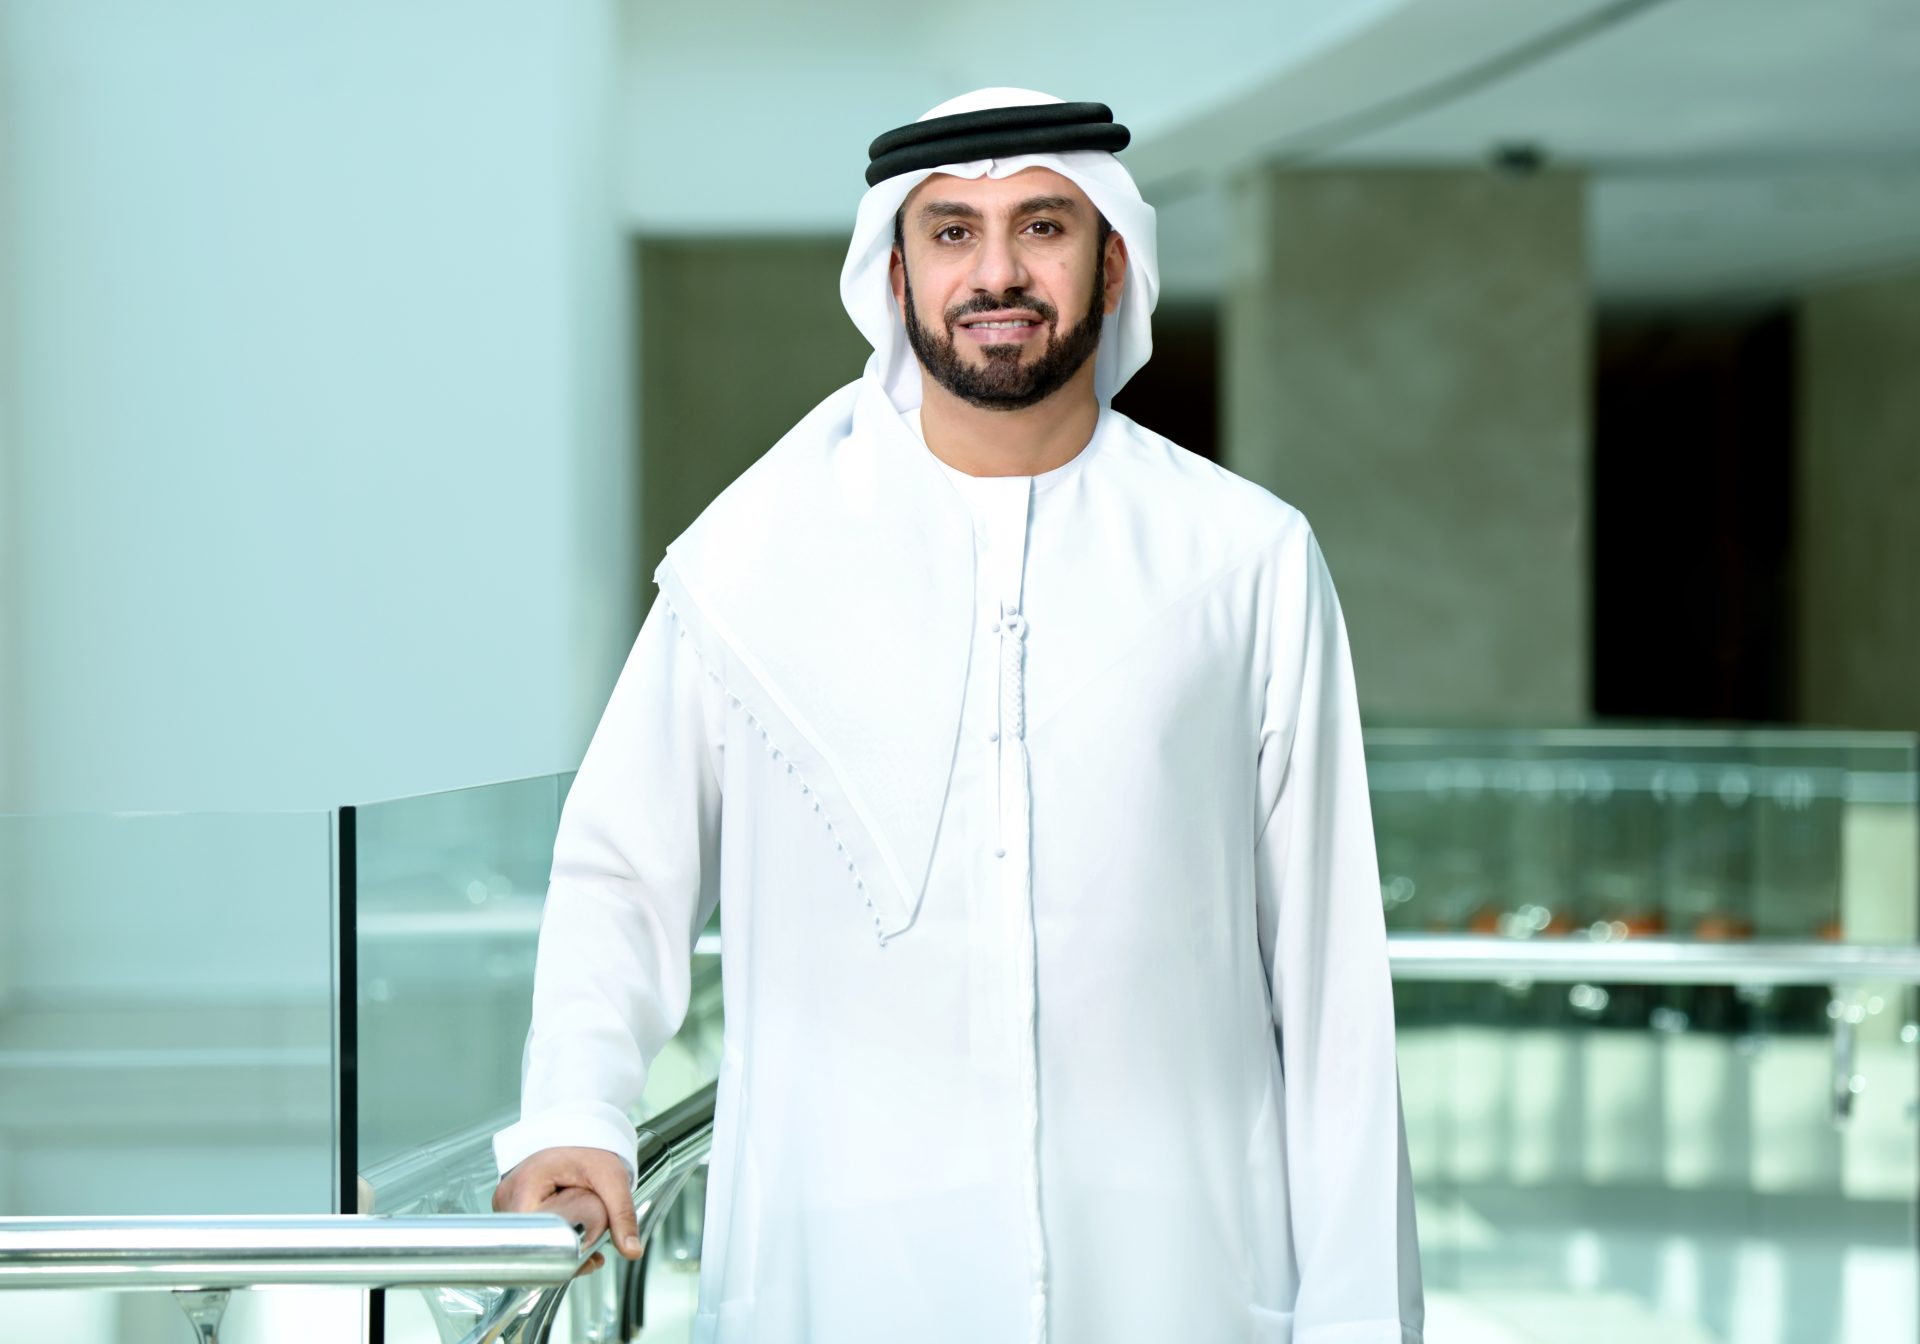 DFSA's new Business Plan will boost UAE's growth as financial services hub.